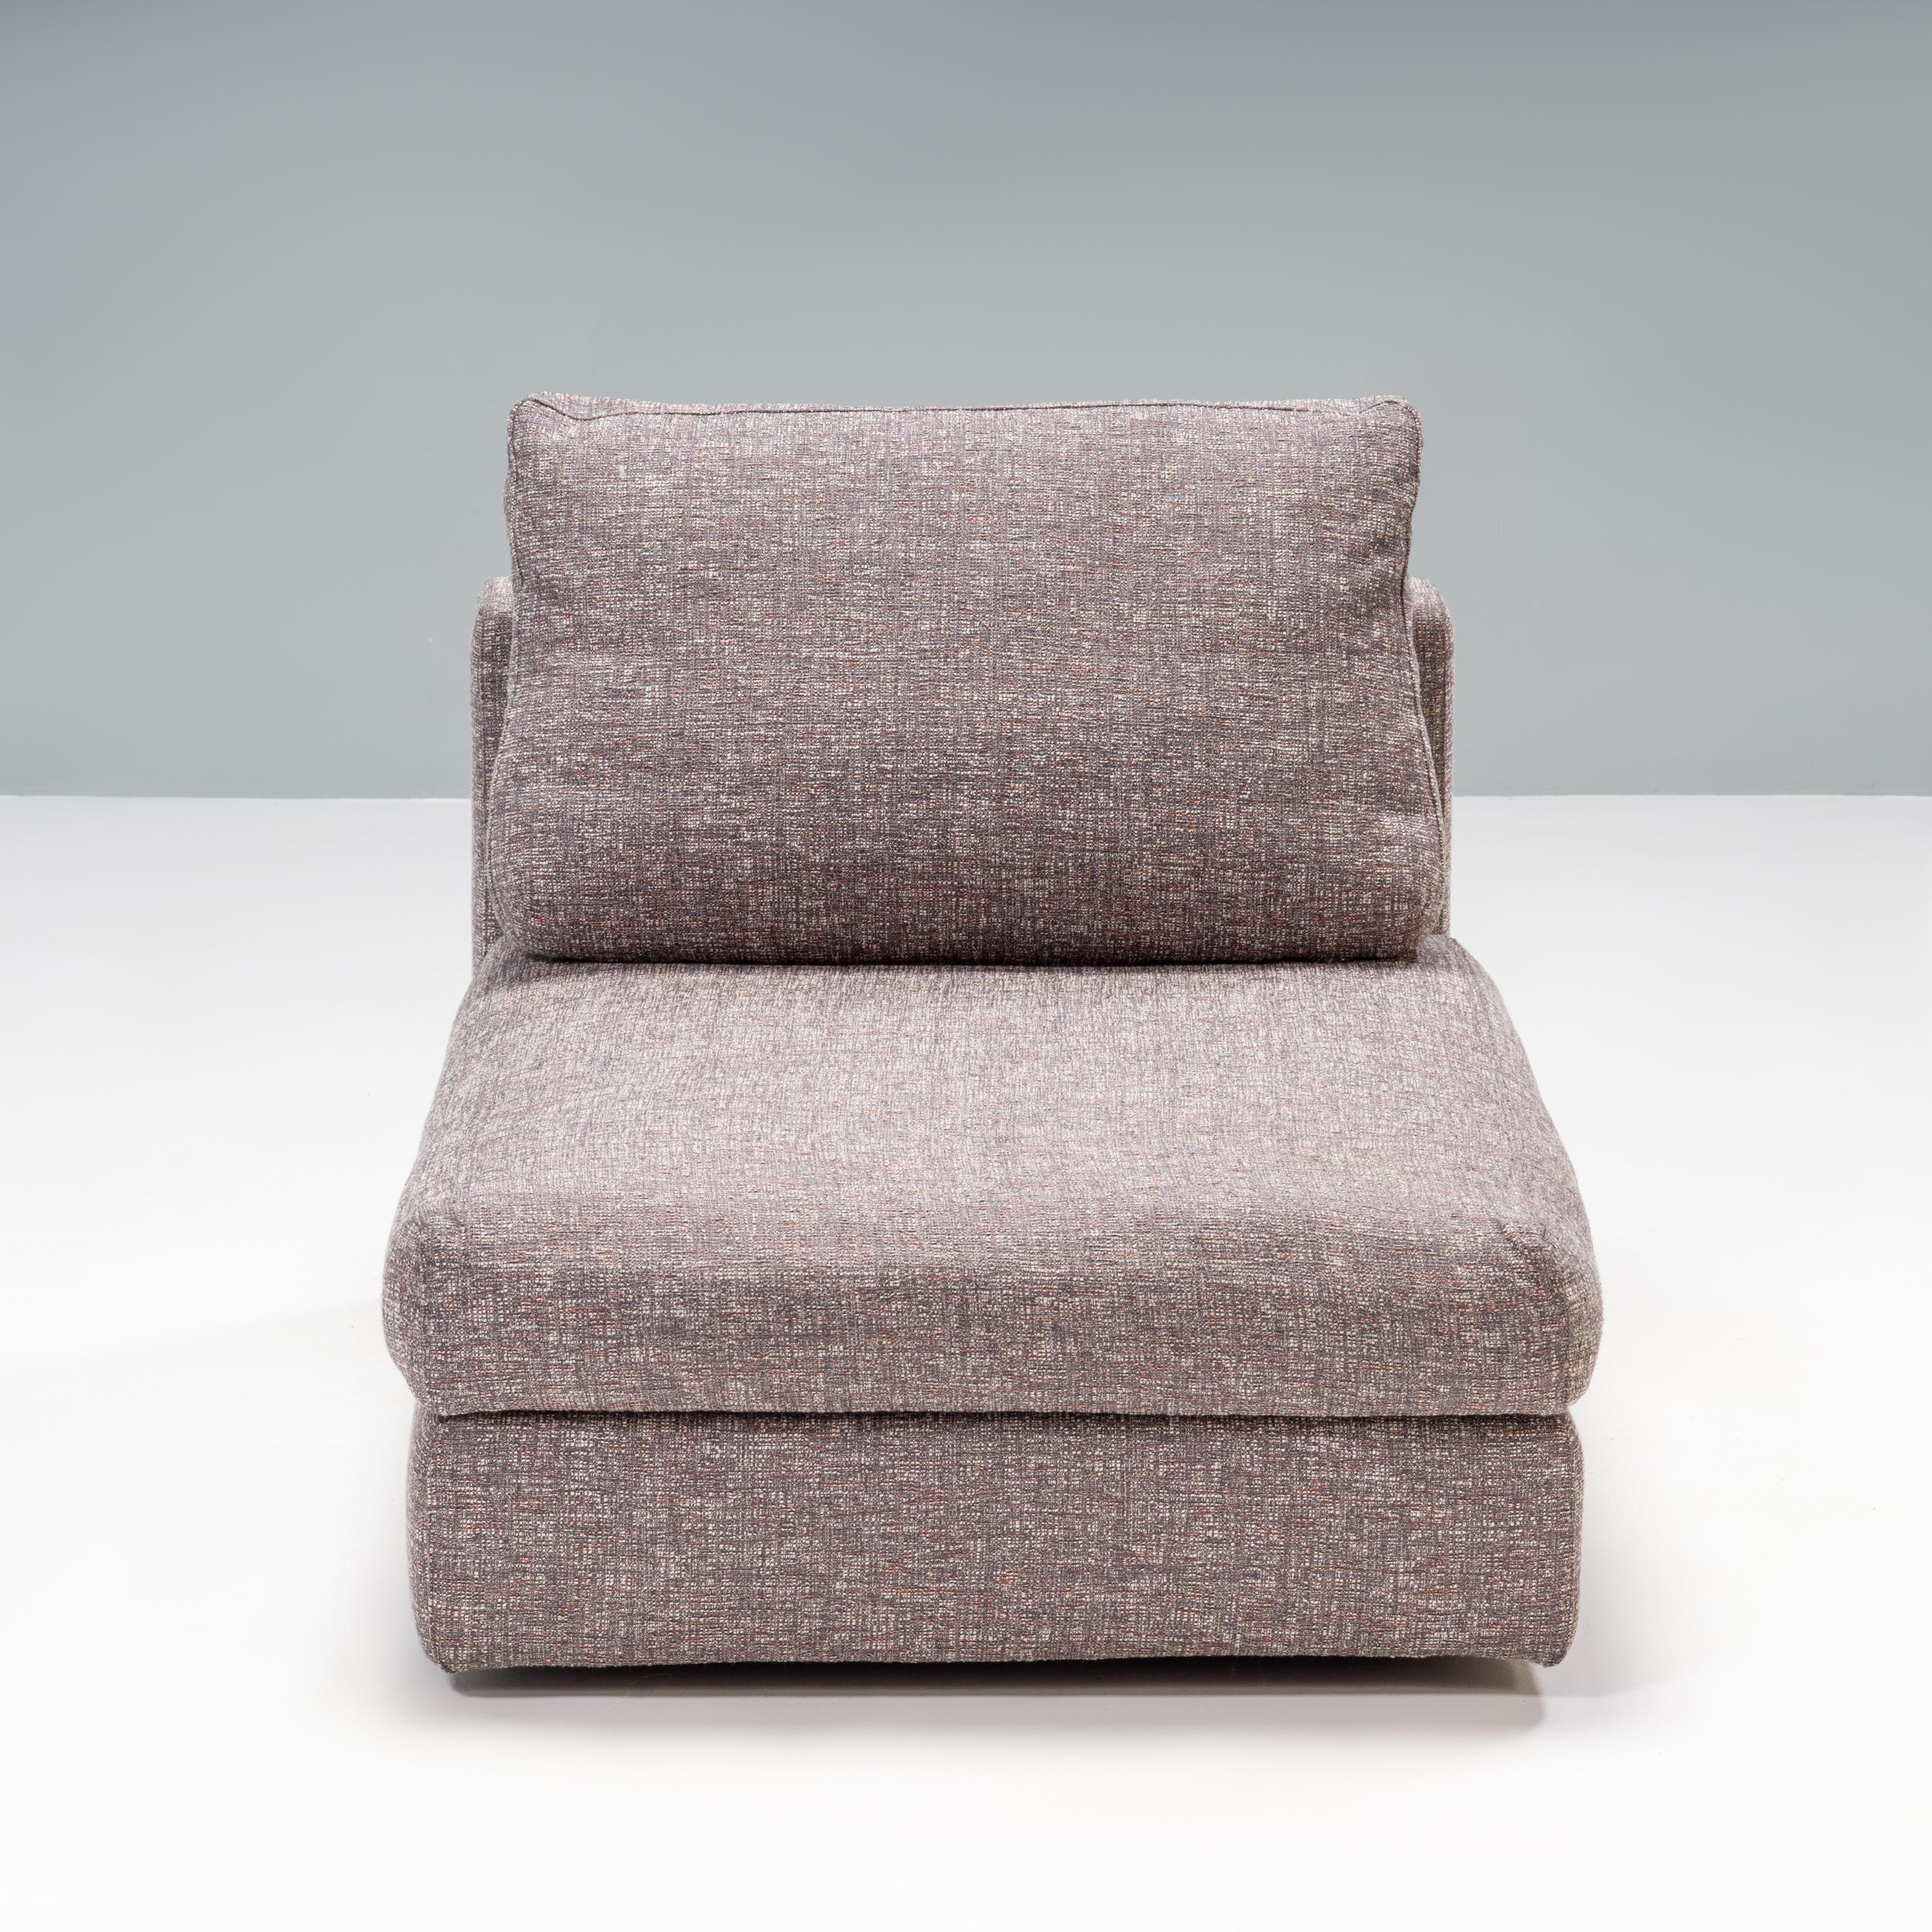 Designed by Piero Lissoni for Cassina in 2012, the Miloe seating range was designed for modern life.

The seat has a boxy shape with no arms, and a wide, deep seat for ultimate comfort.

Fully upholstered in Raf Simons for Kvadrat Sonar fabric,